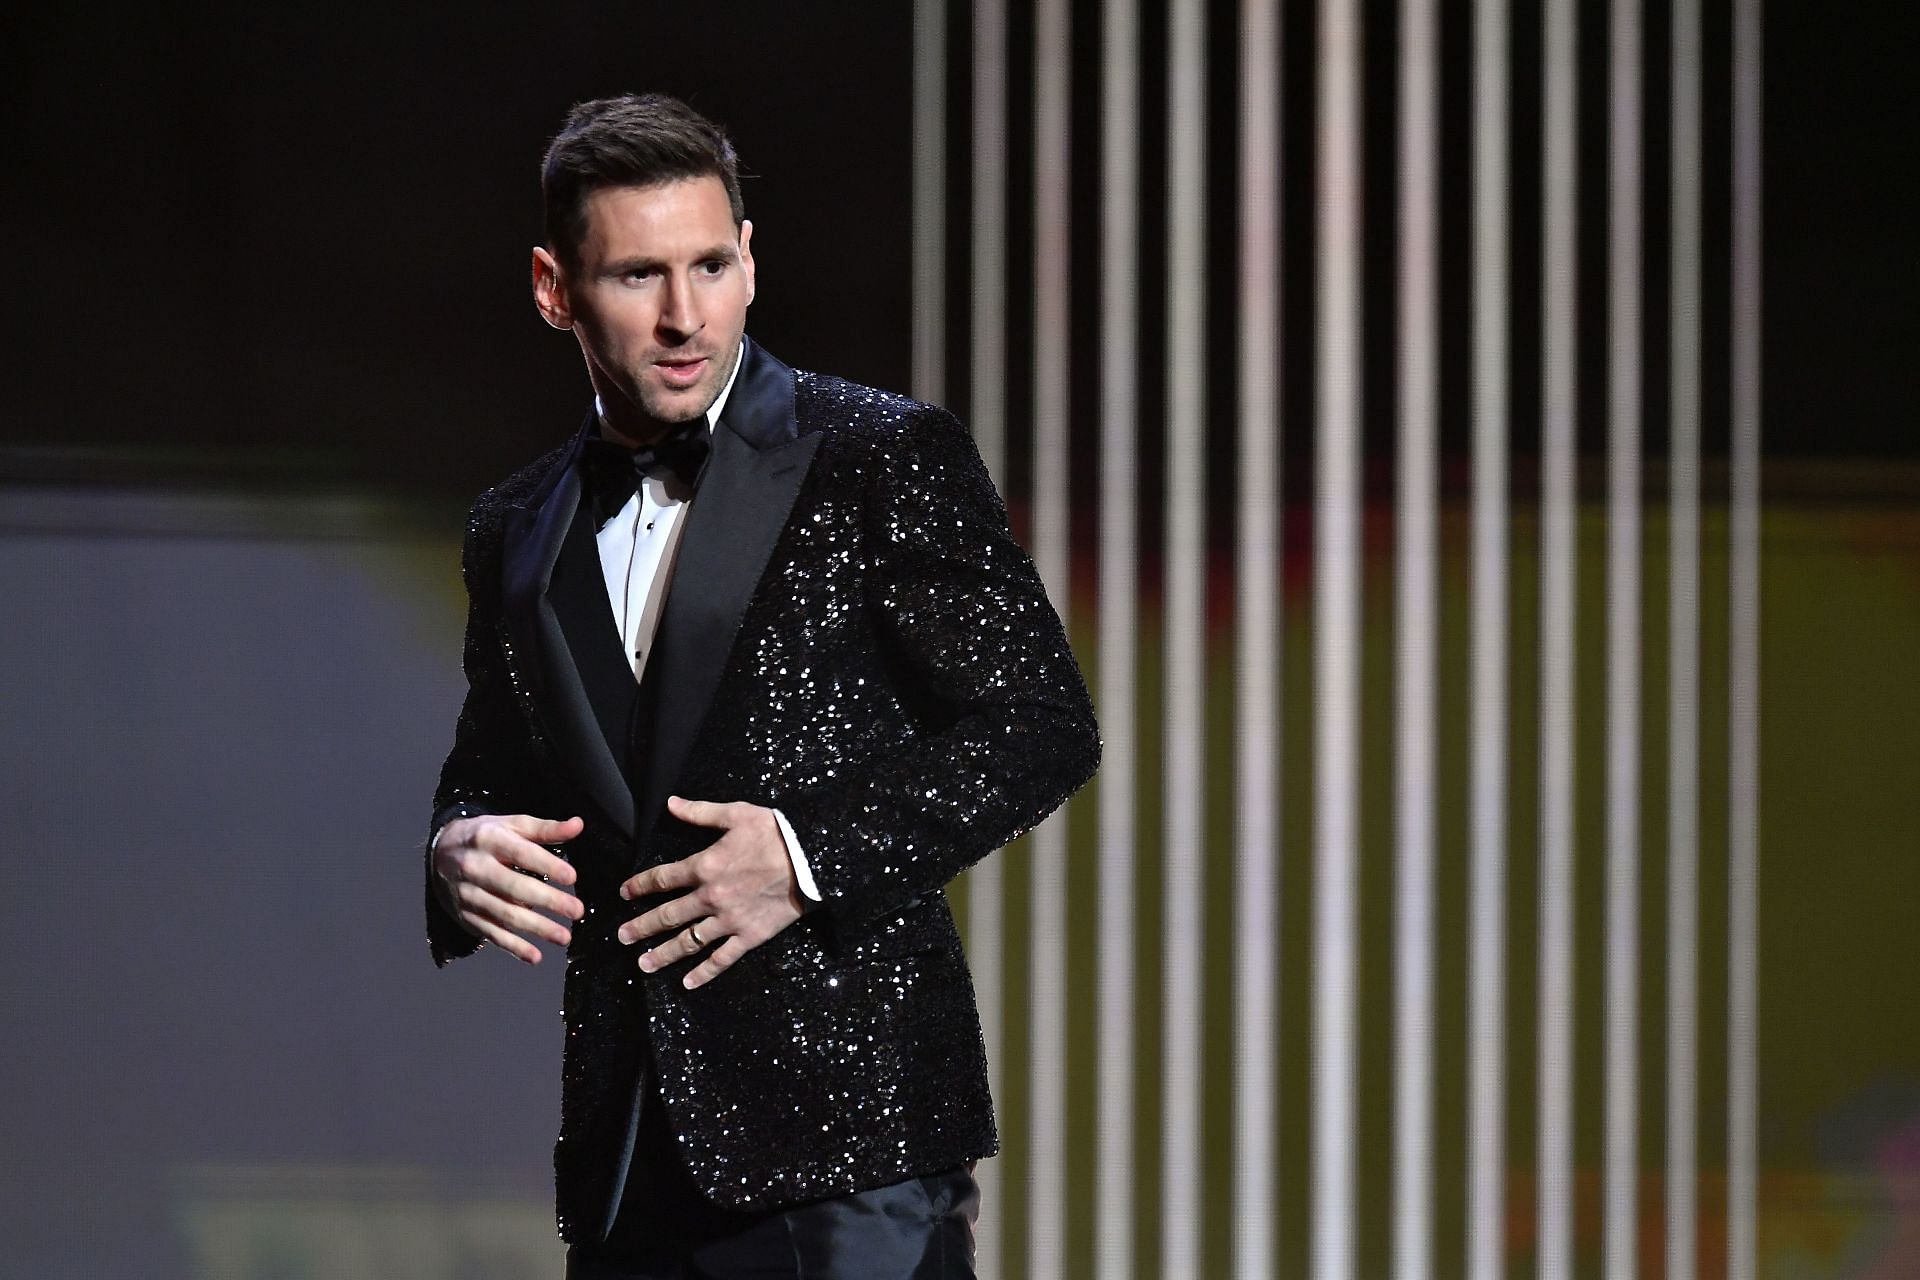 Bixente Lizarazu has tipped Lionel Messi to hit top form in the second half of the season.